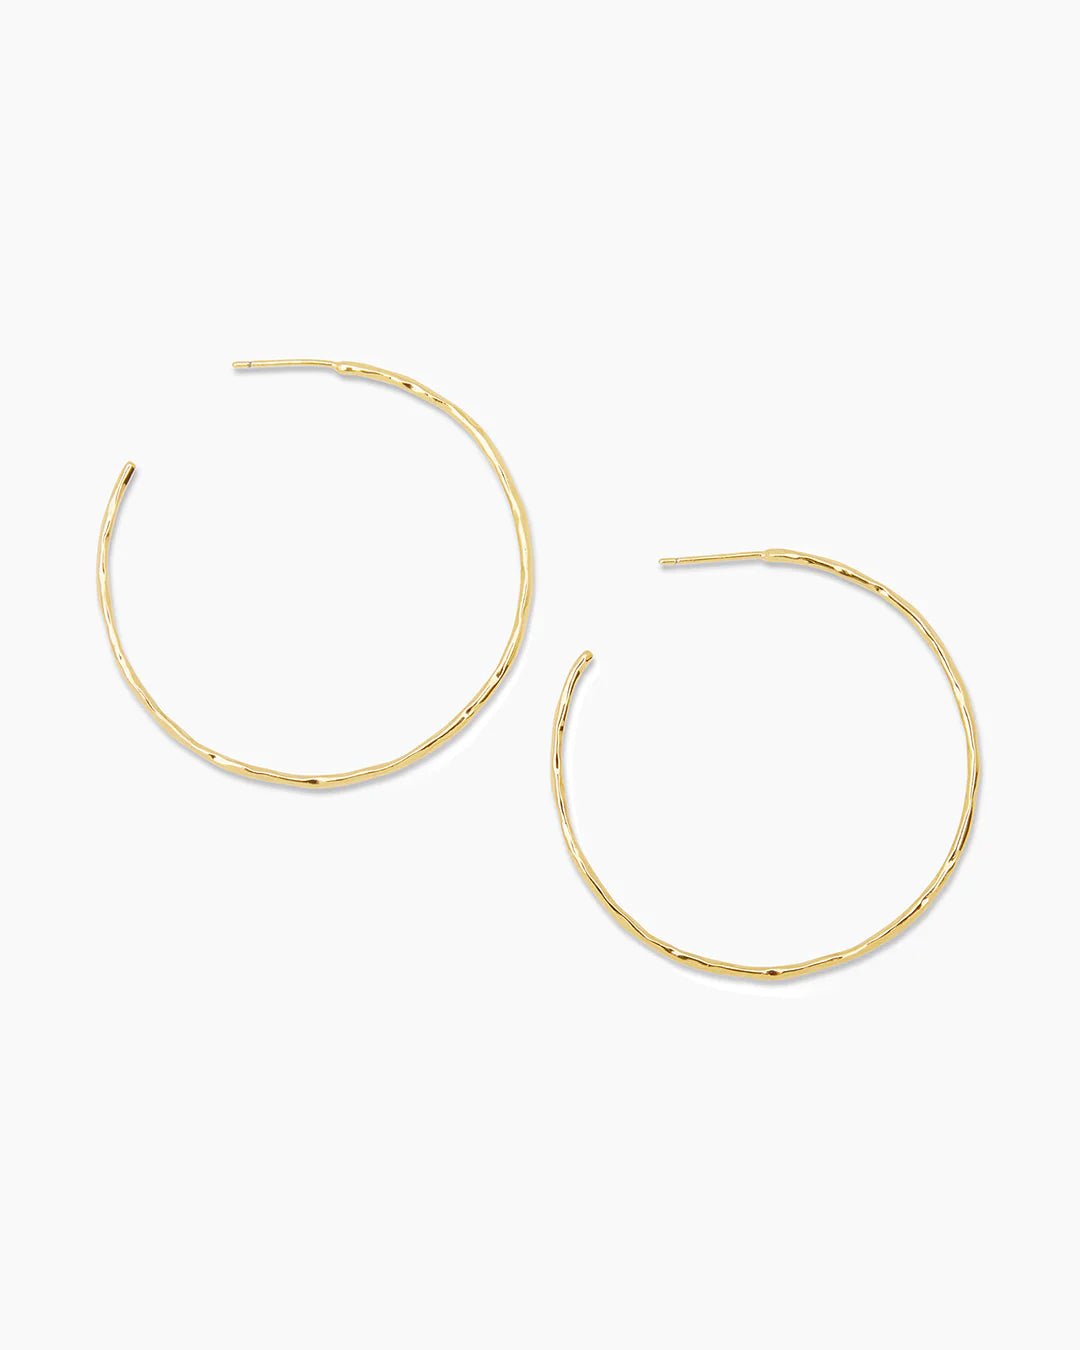  Taner Thin hoops, medium sized hoops || option::Gold Plated